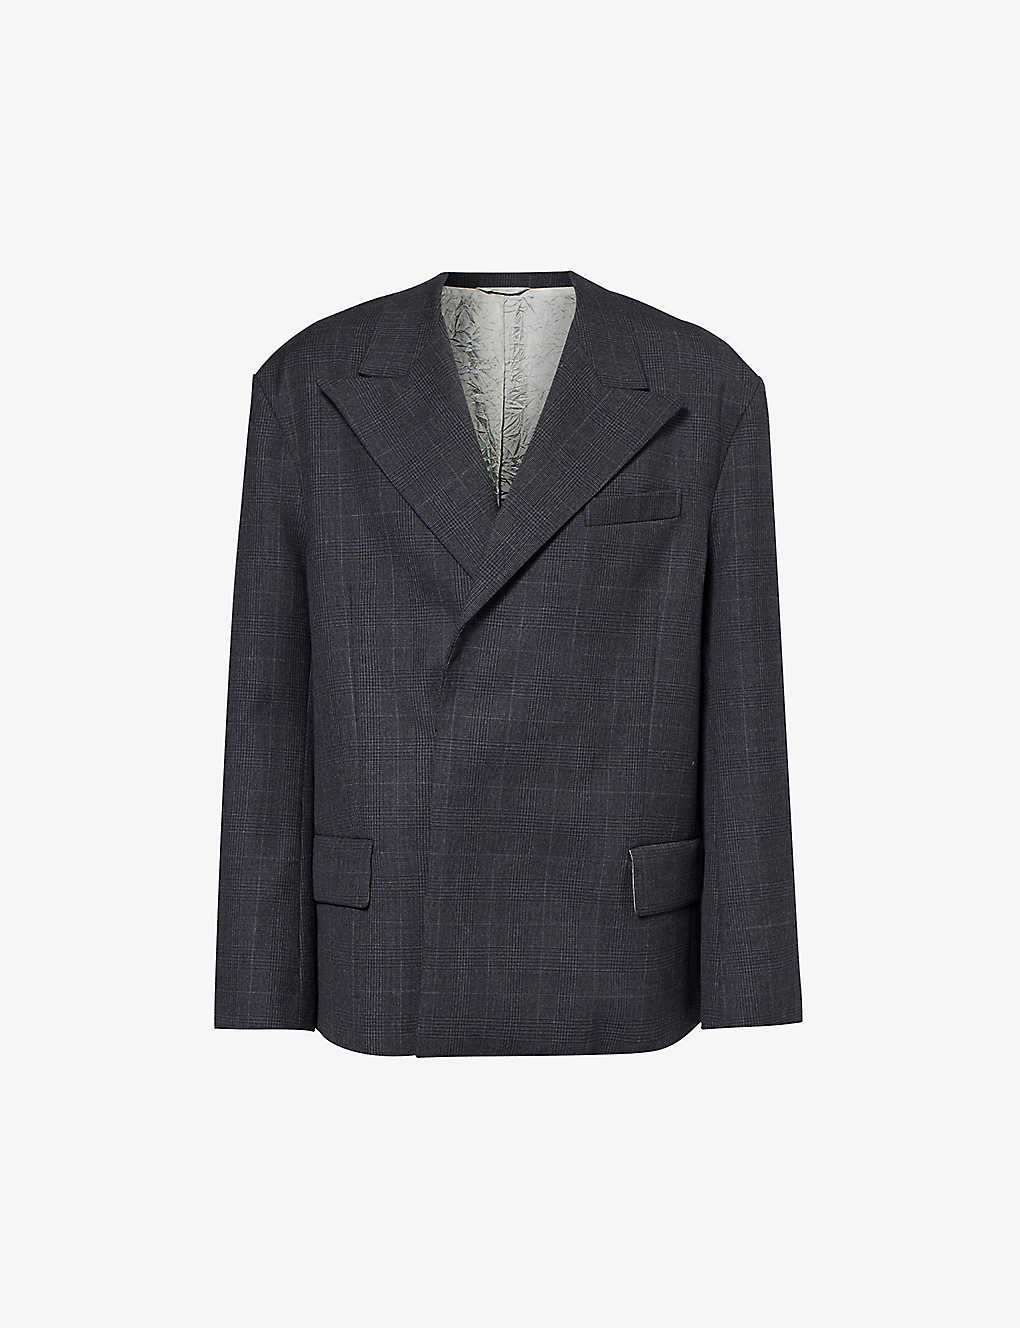 ACNE STUDIOS ACNE STUDIOS MENS GREY DOUBLE-BREASTED NOTCHED-LAPEL OVERSIZED-FIT WOVEN JACKET